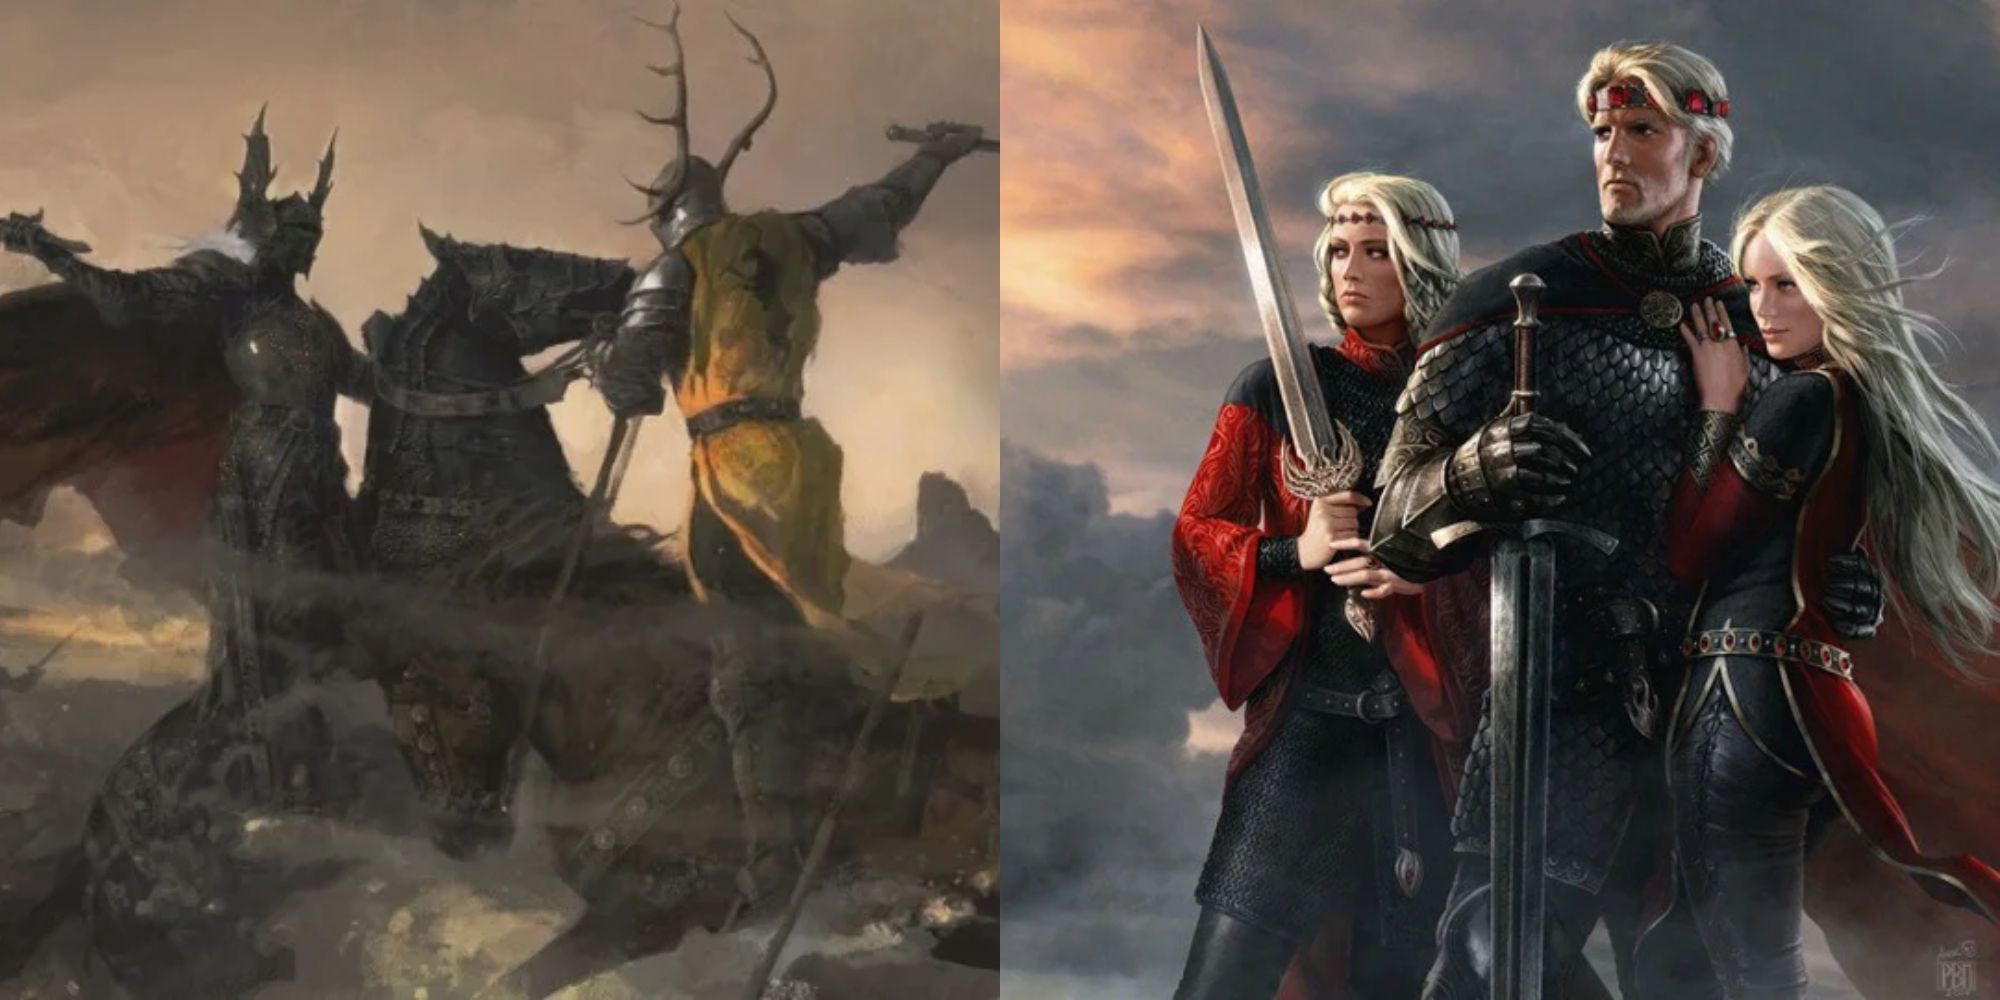 Split image showing Robert fighting Rhaegar and the Targaryen Conquerors in A Song of Ice and Fire